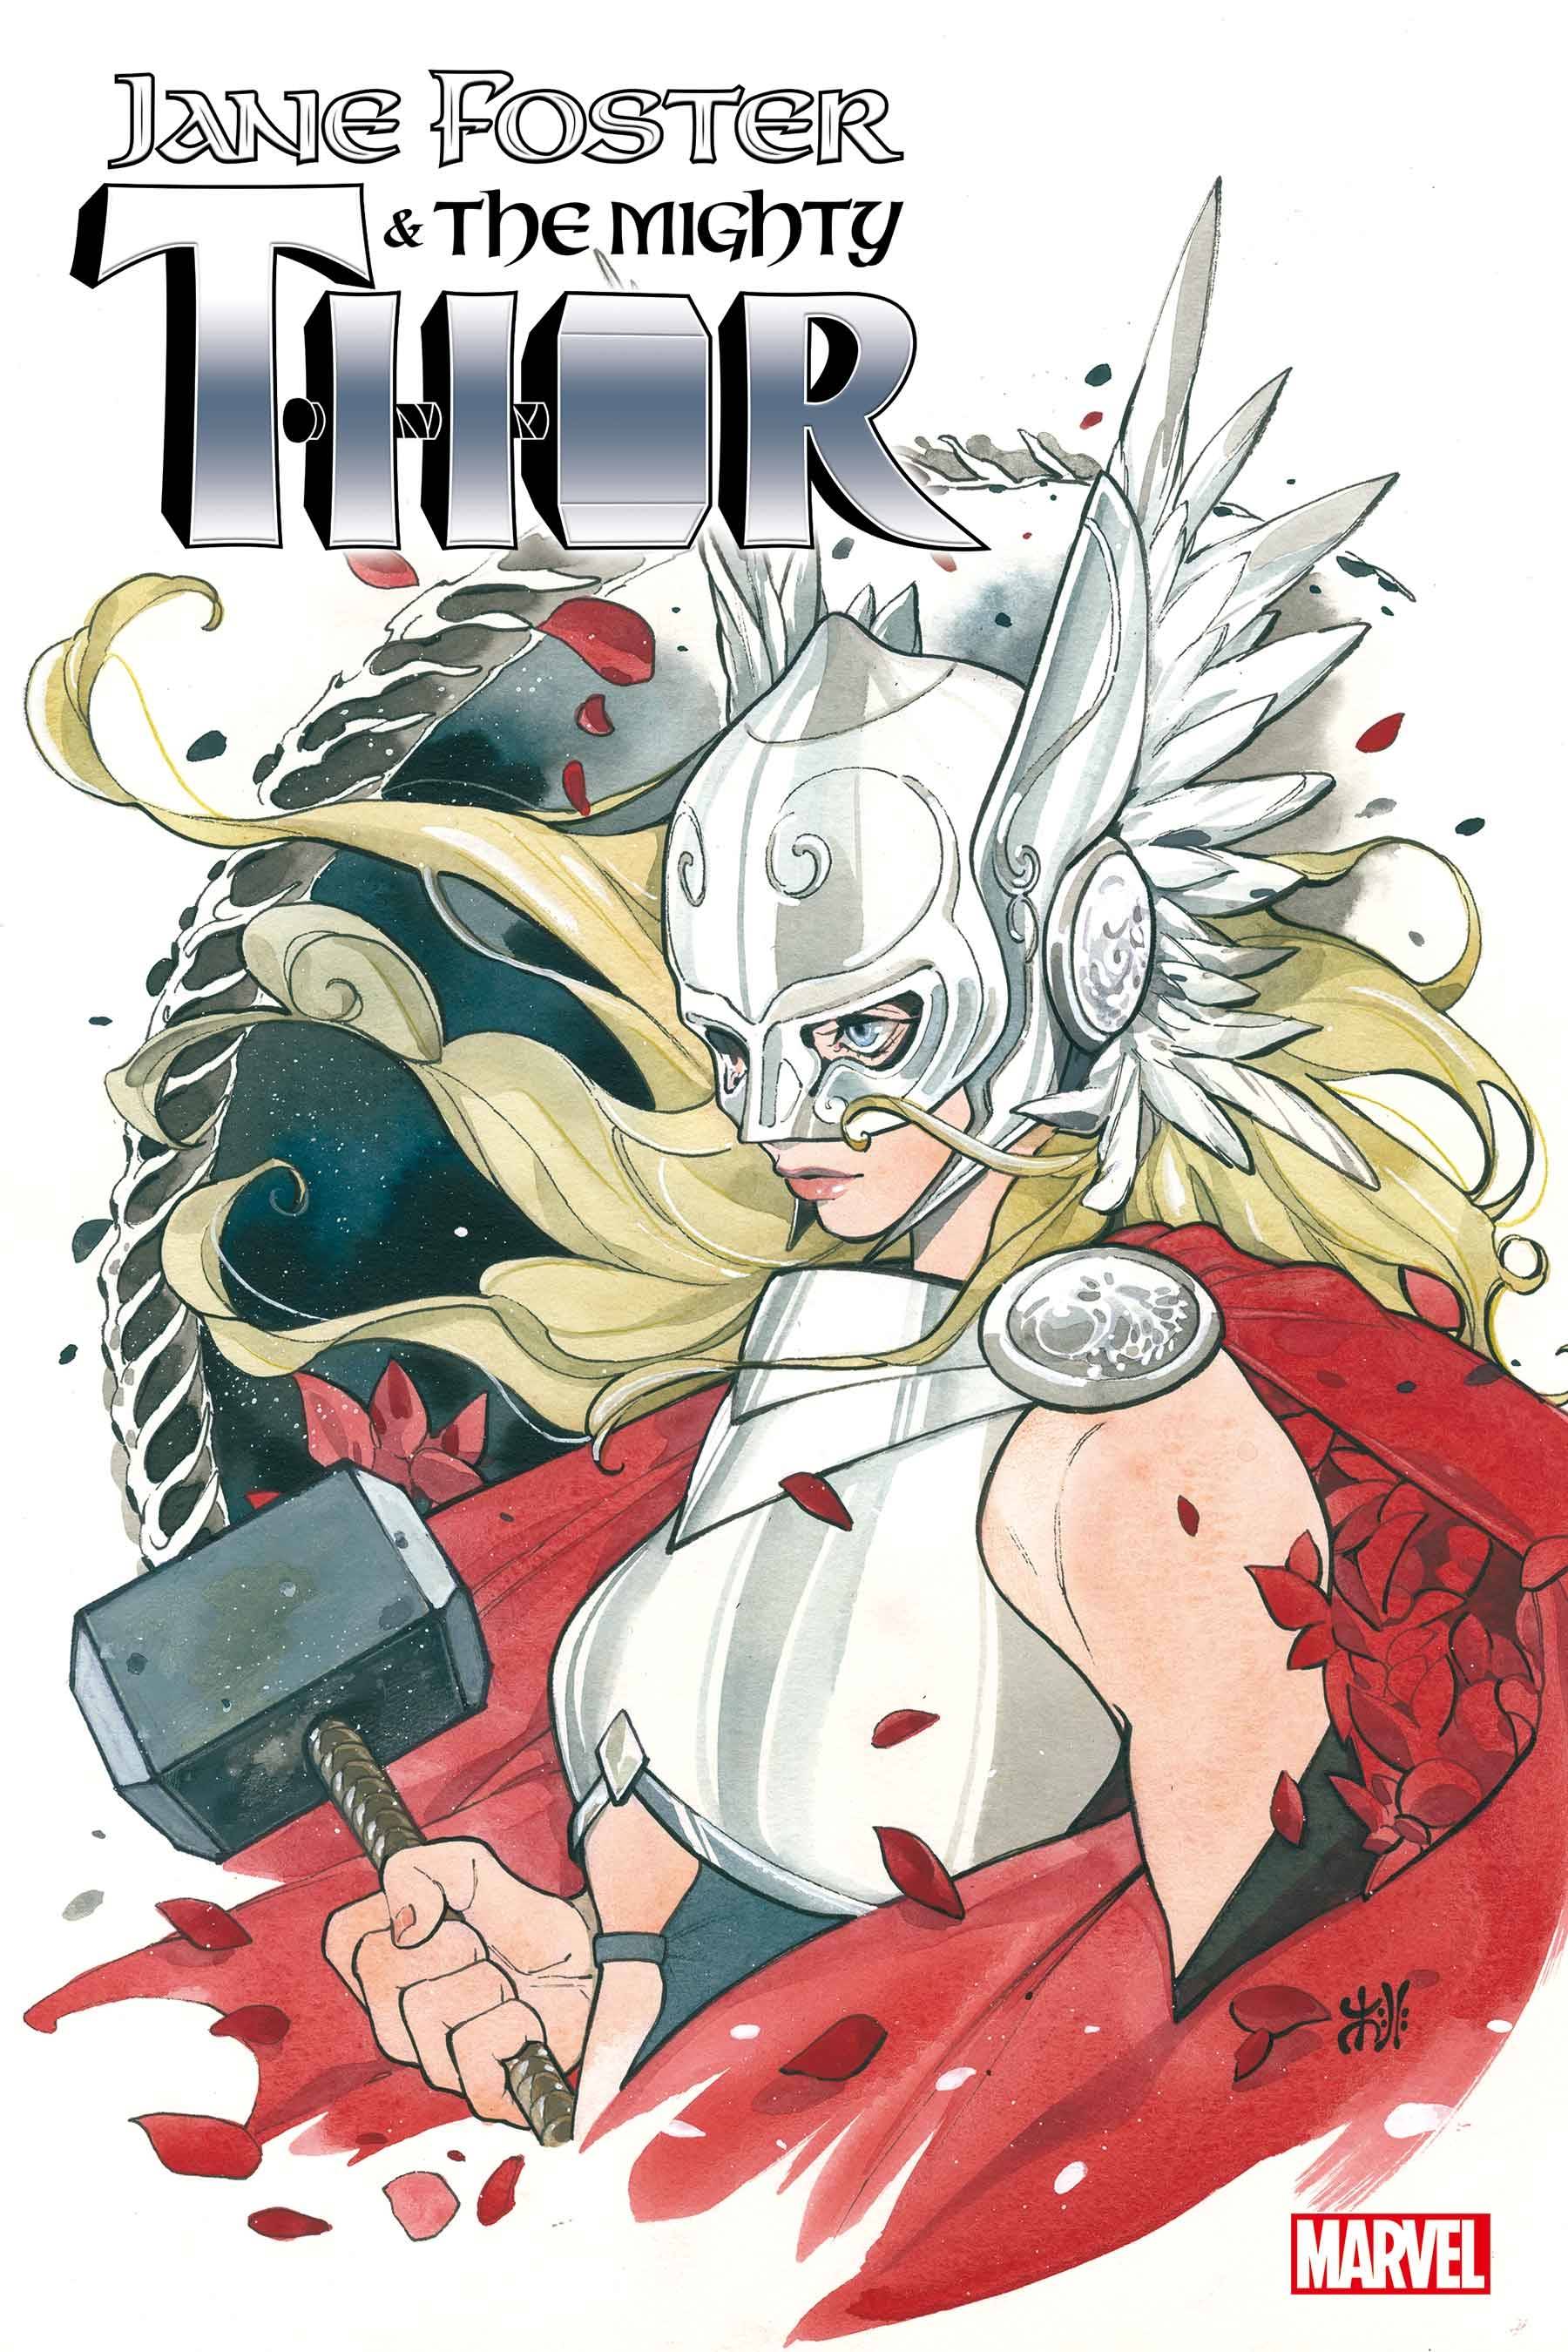 06/08/2022 JANE FOSTER MIGHTY THOR #1 (OF 5) MOMOKO VARIANT